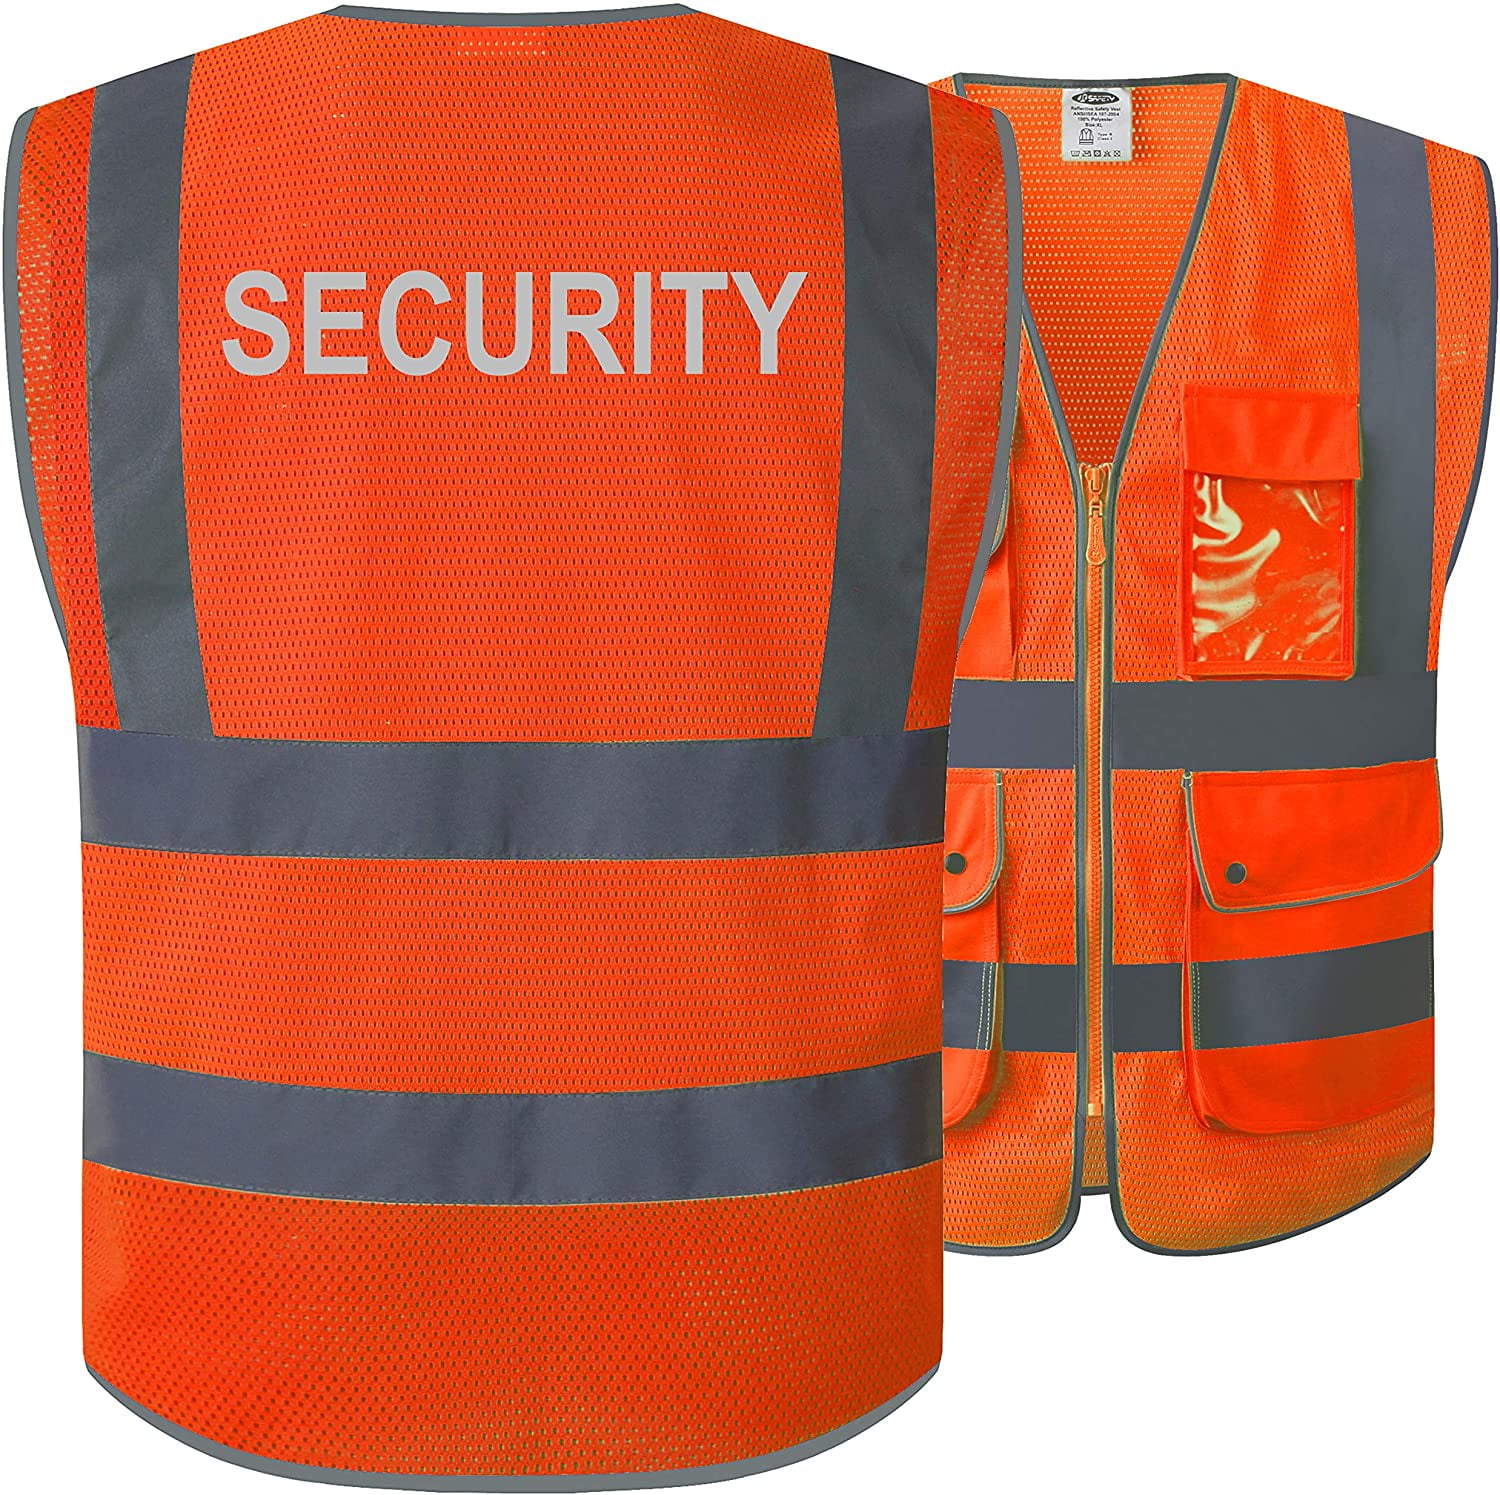 SECURITY HOODIE *** Safety Orange or Safety Green *** S-5XL *** Guard Uniform 